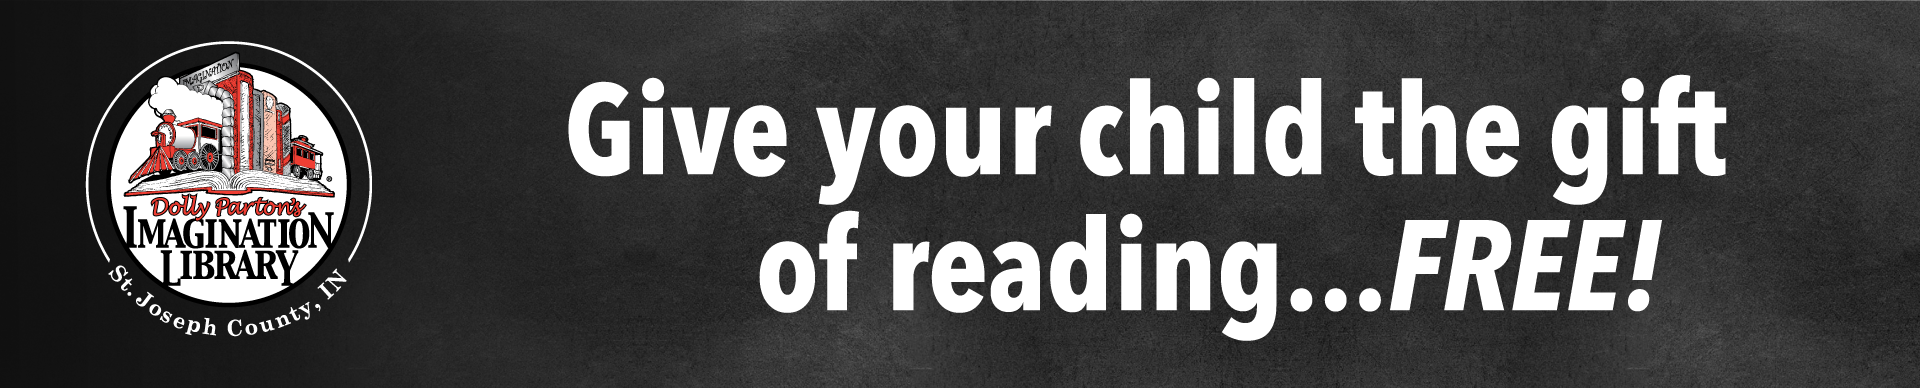 Give your child the gift of reading.